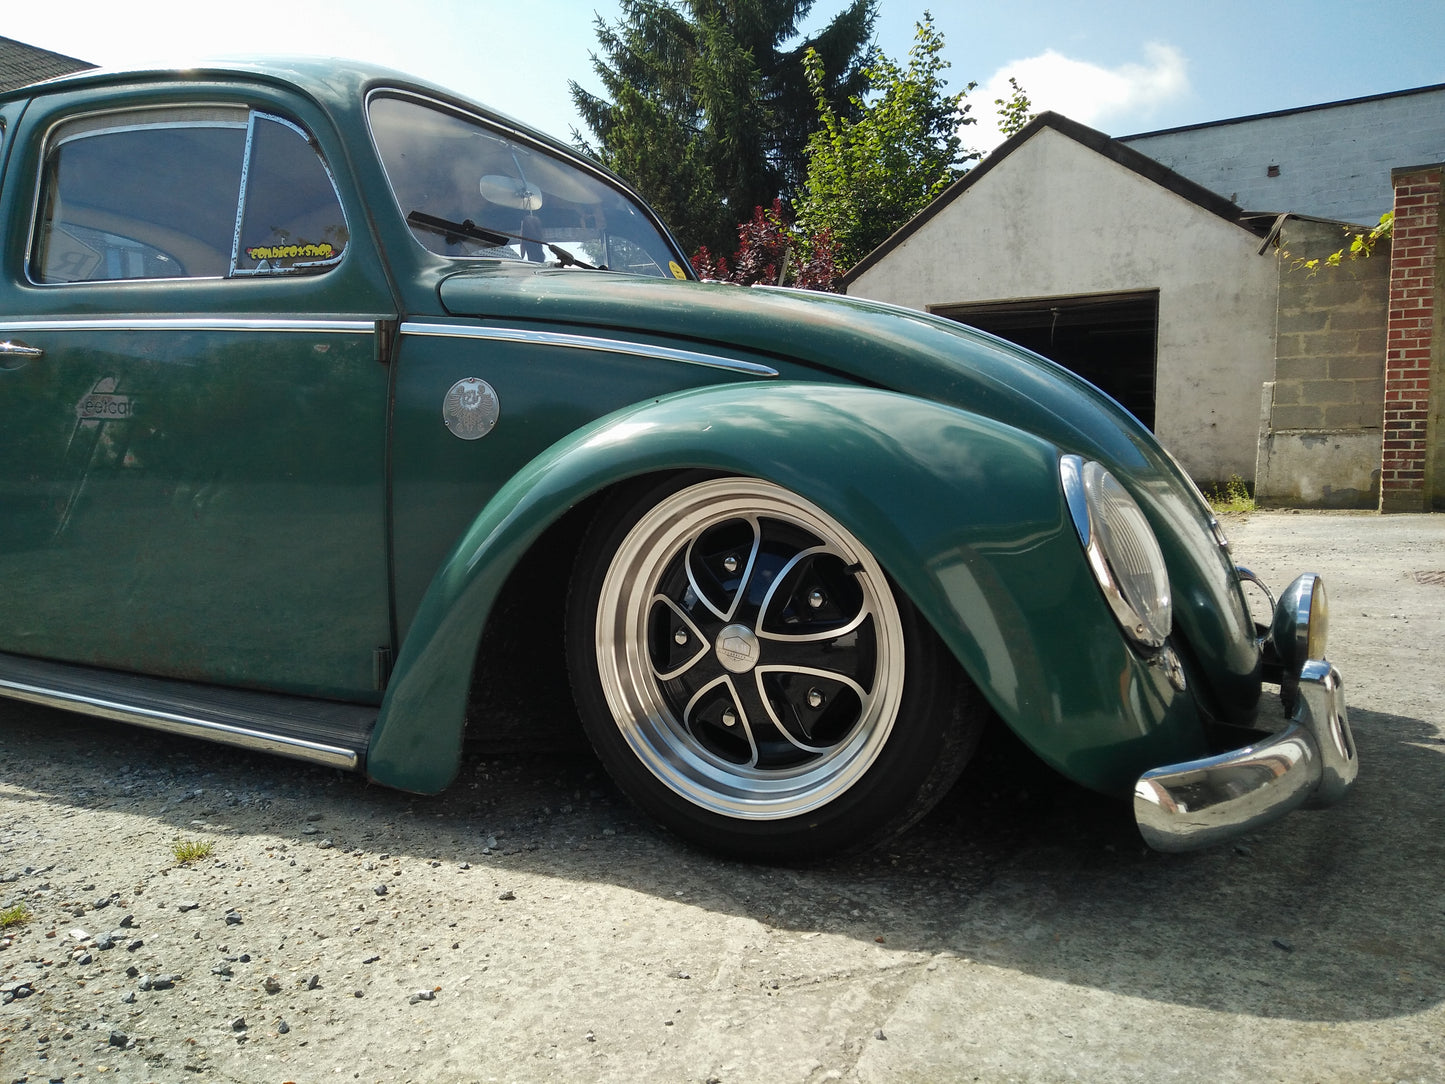 Green VW beetle with 15" DSR wheels 